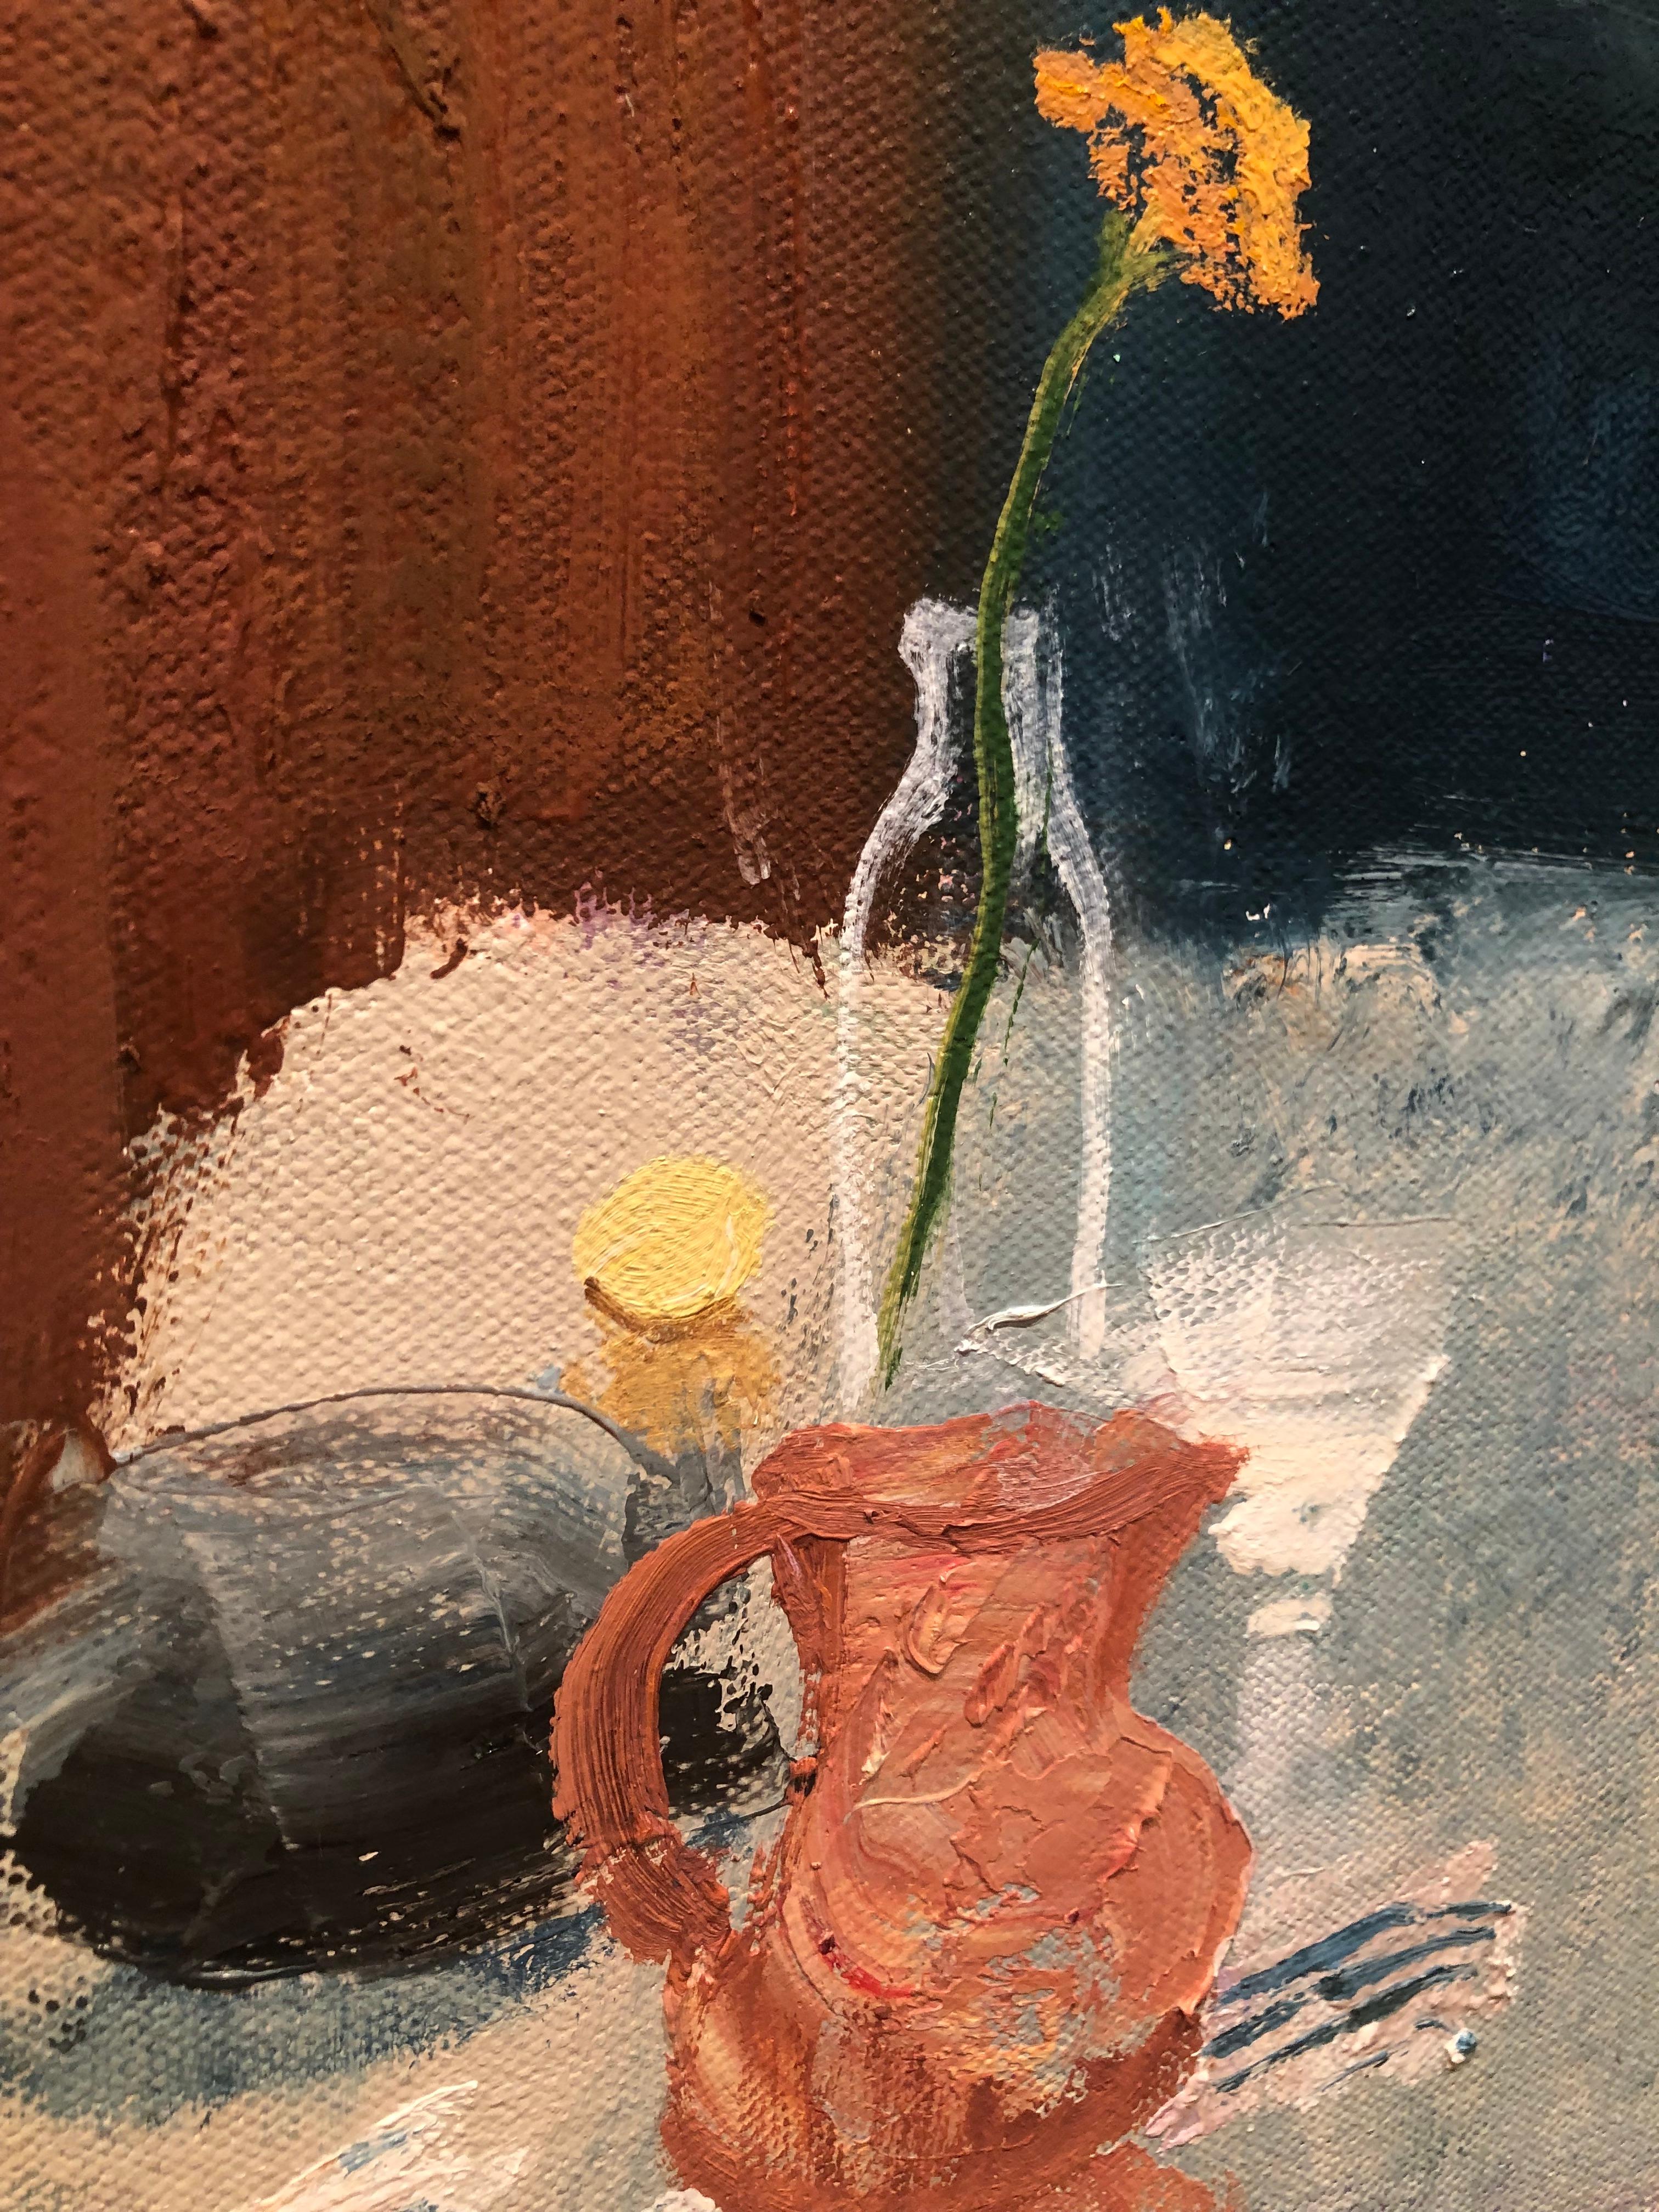 Melanie Parke’s latest selection of still lifes looks at quotidian interiors and imbues them with magic. All of the elements of the still life are present: a stem in glimmering glass, the casual fold of a table cloth or napkin, or a scatter of